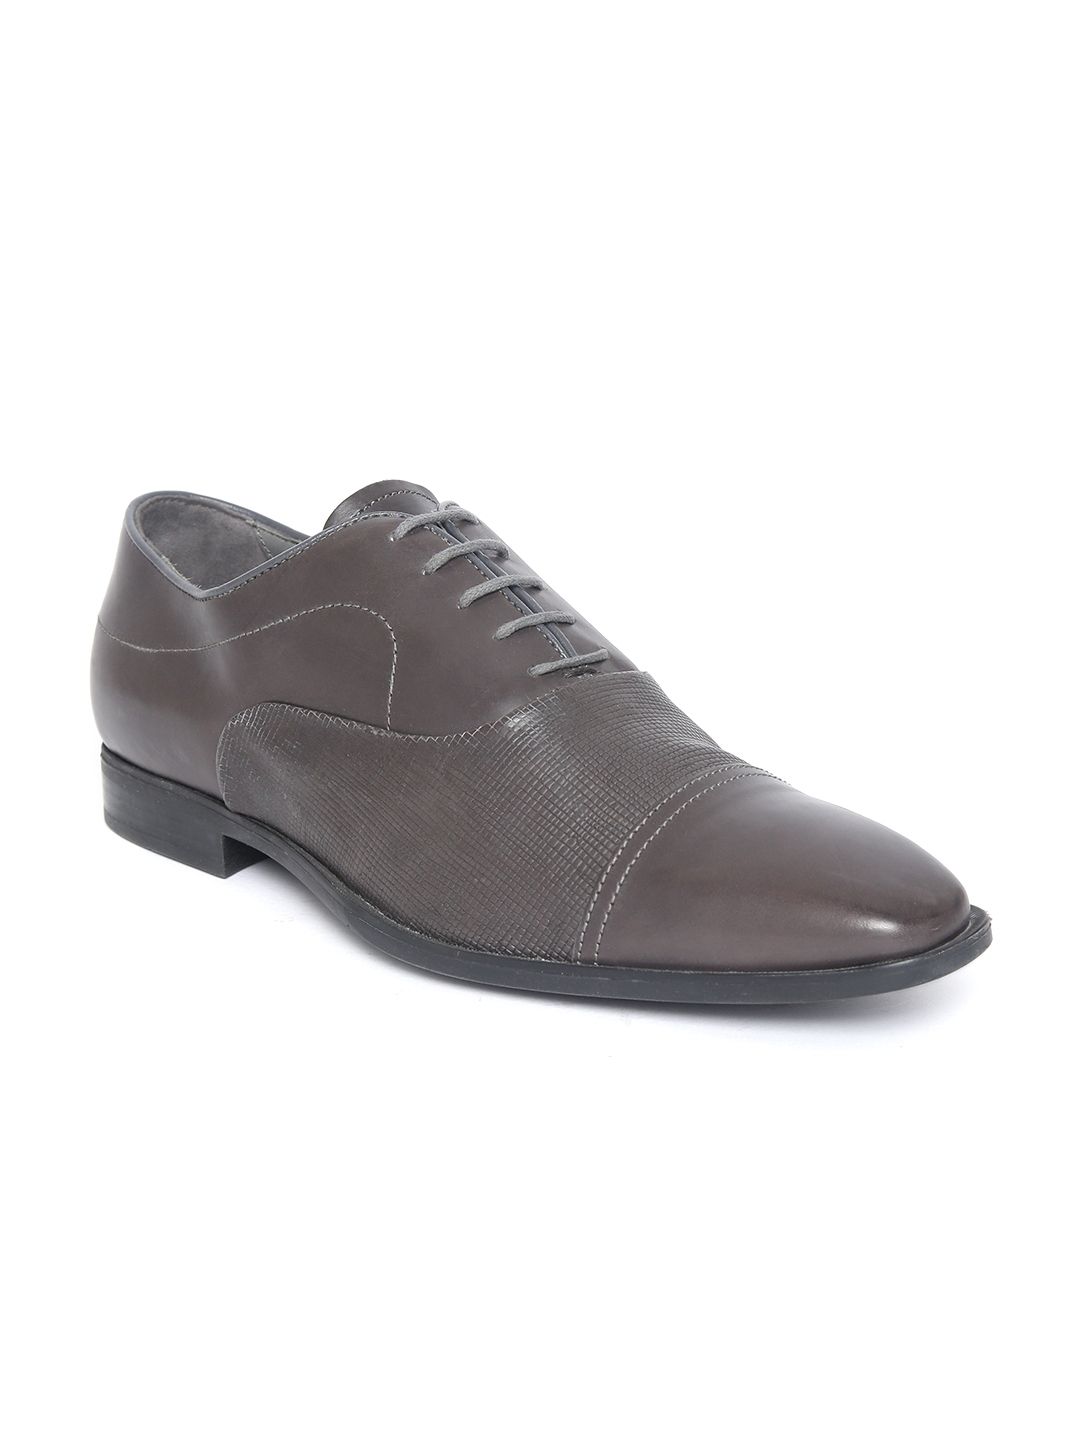 Buy Geox Men Grey Leather Textured Formal Oxfords - Formal Shoes for ...